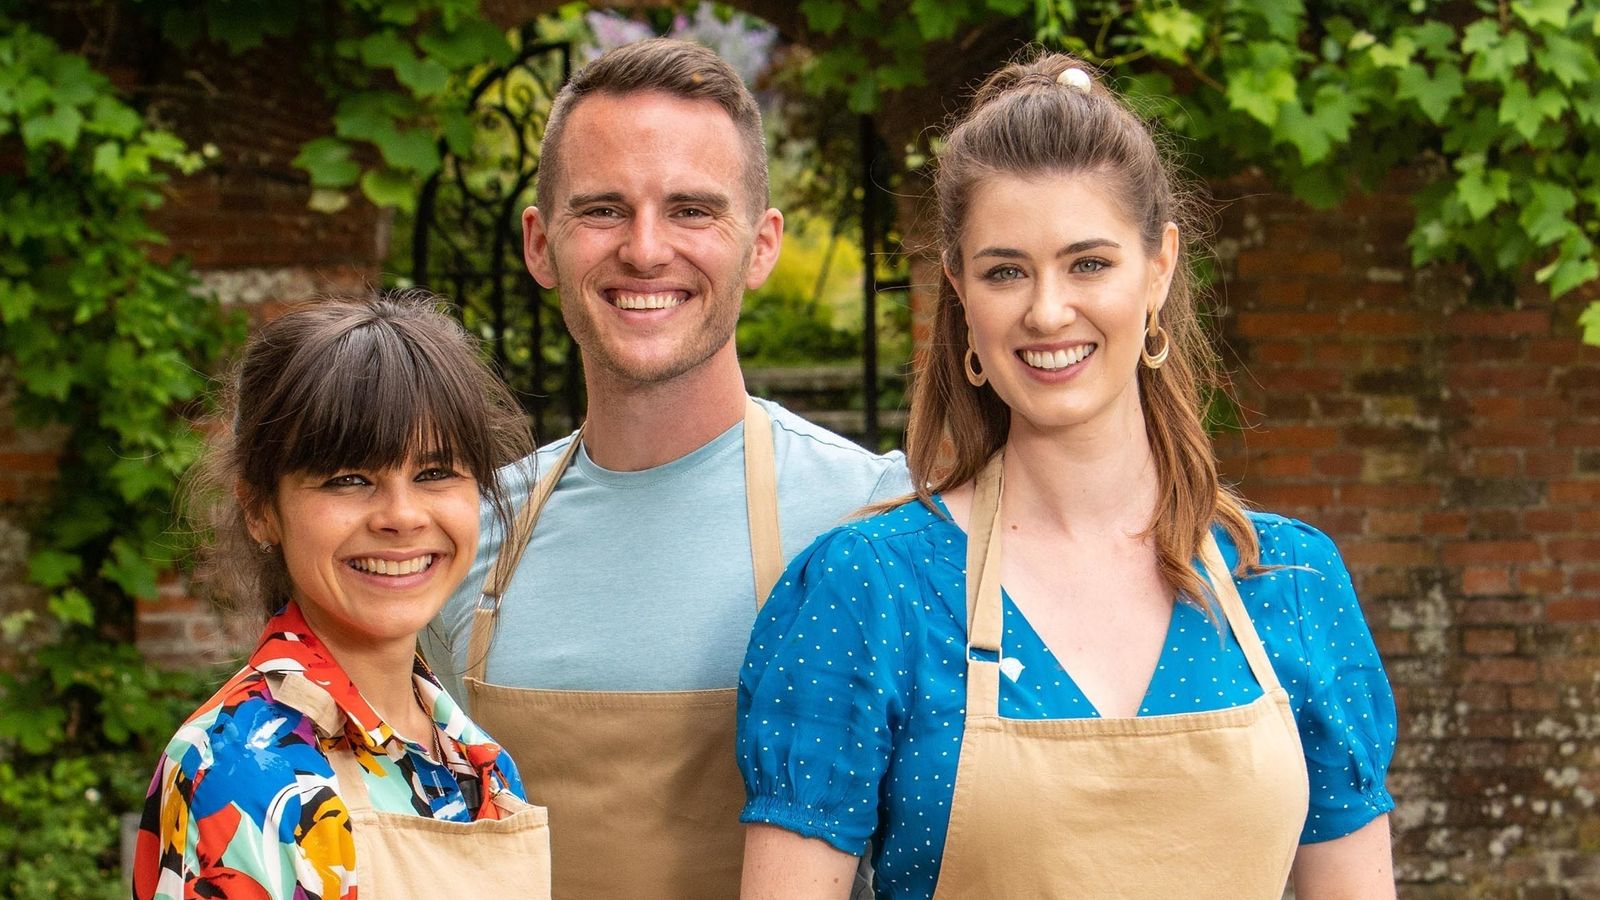 Bake Off winner 'can't remember' moment of victory Ents & Arts News